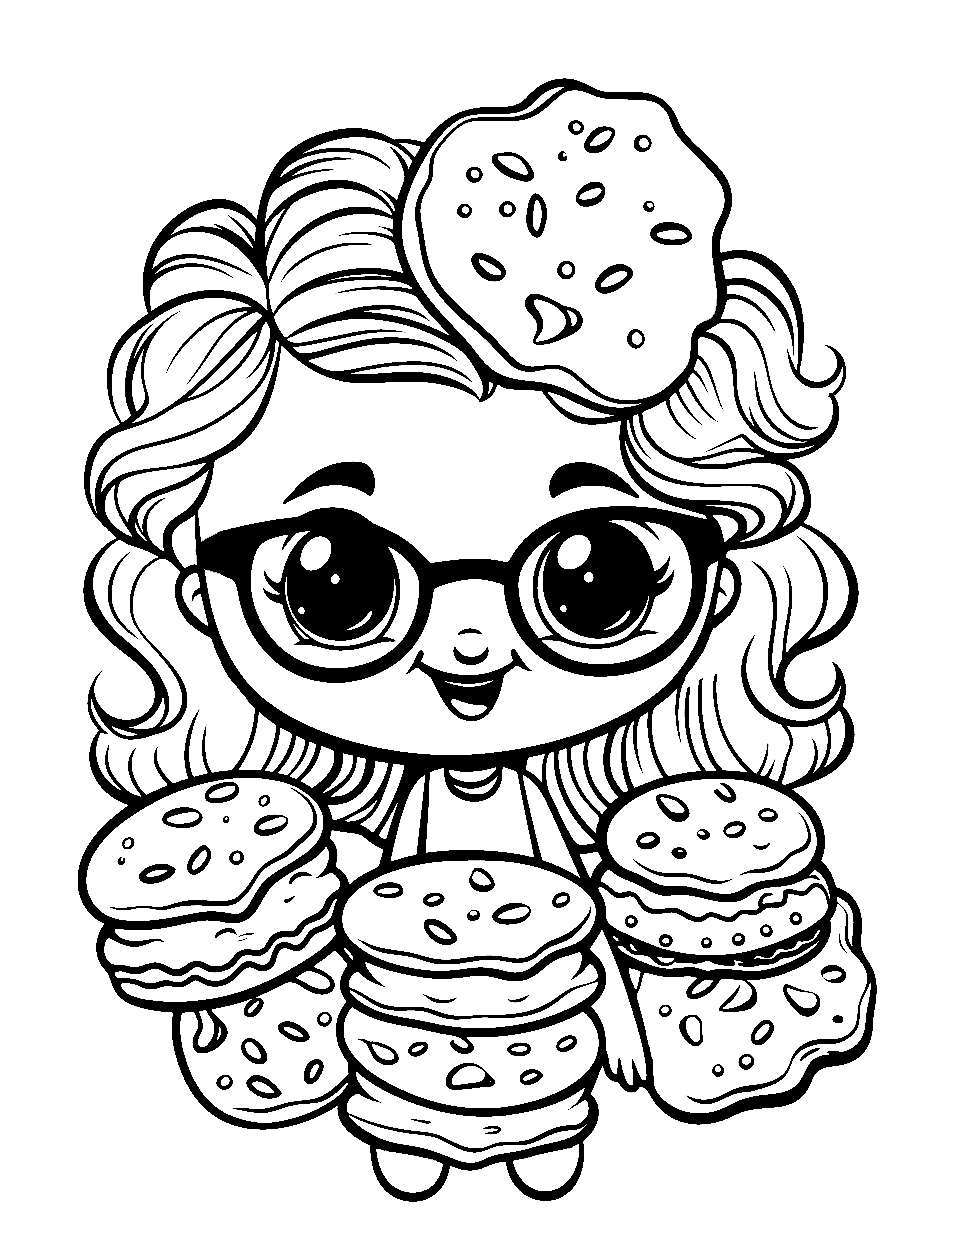 Kooky Cookie Day Coloring Page - Kooky Cookie Shopkin surrounded by mini cookies.